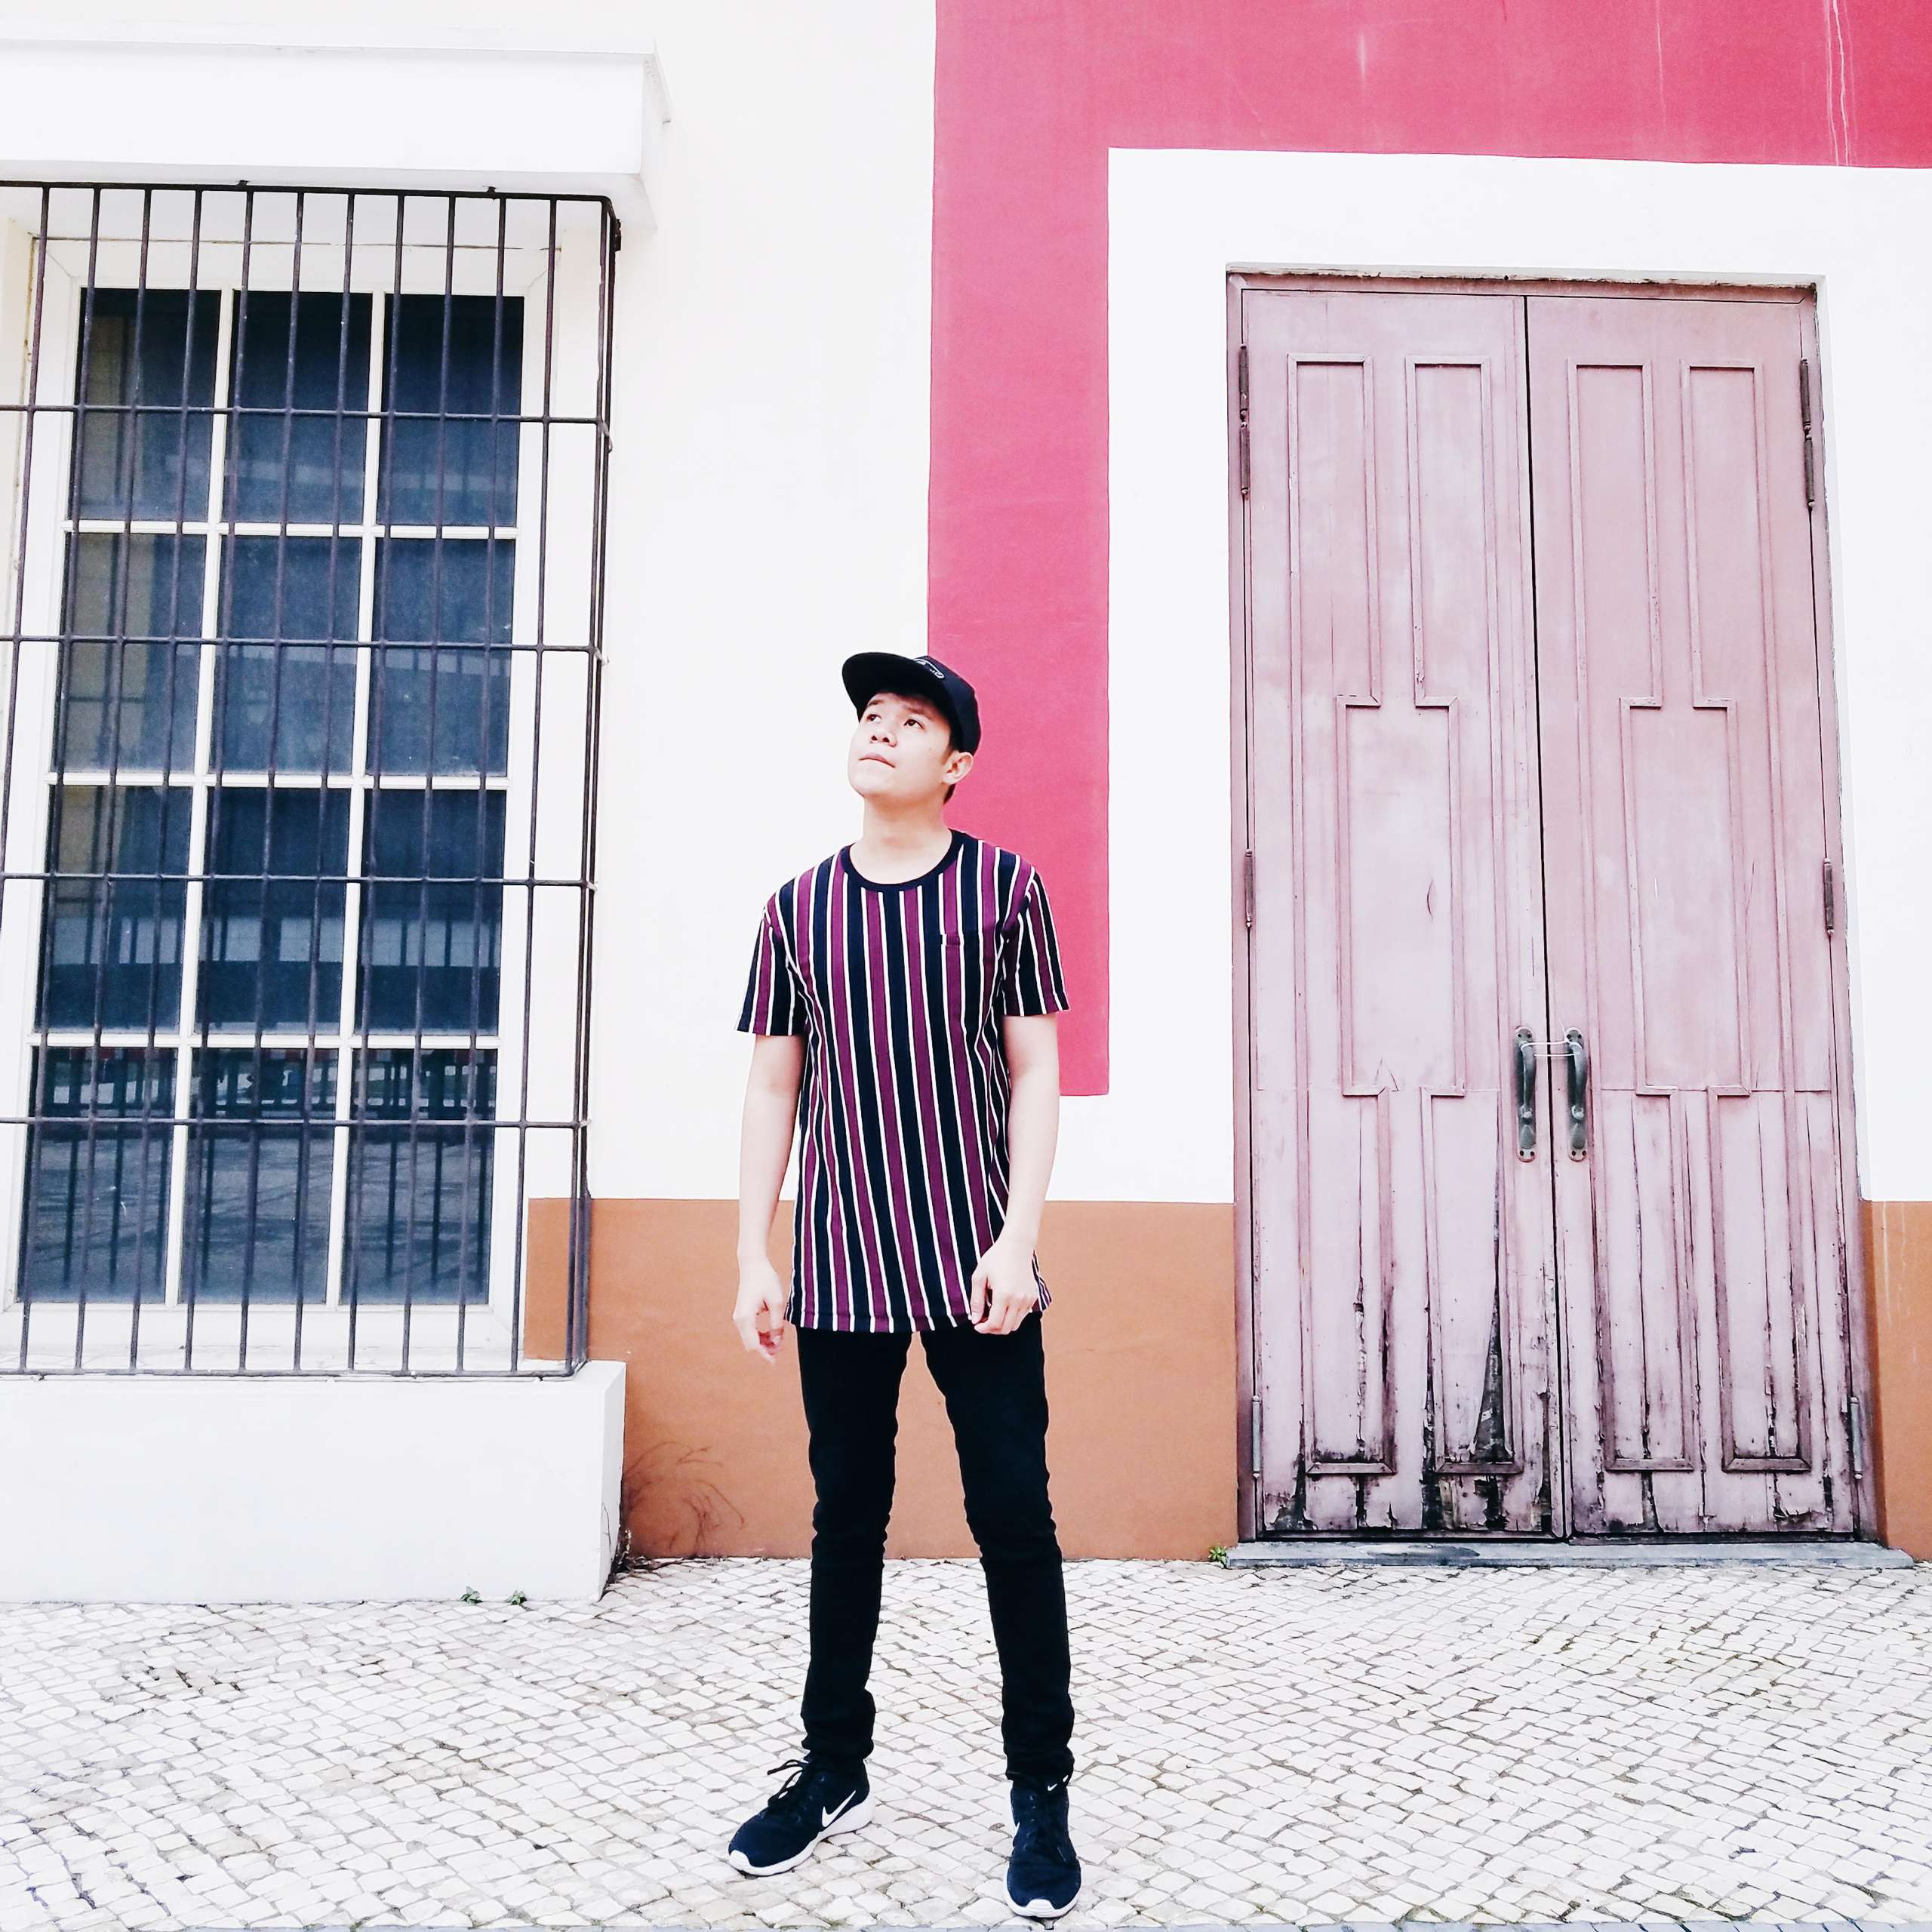 A young man poses on a street in Macau wearing a horizontally striped shirt and dark trousers.